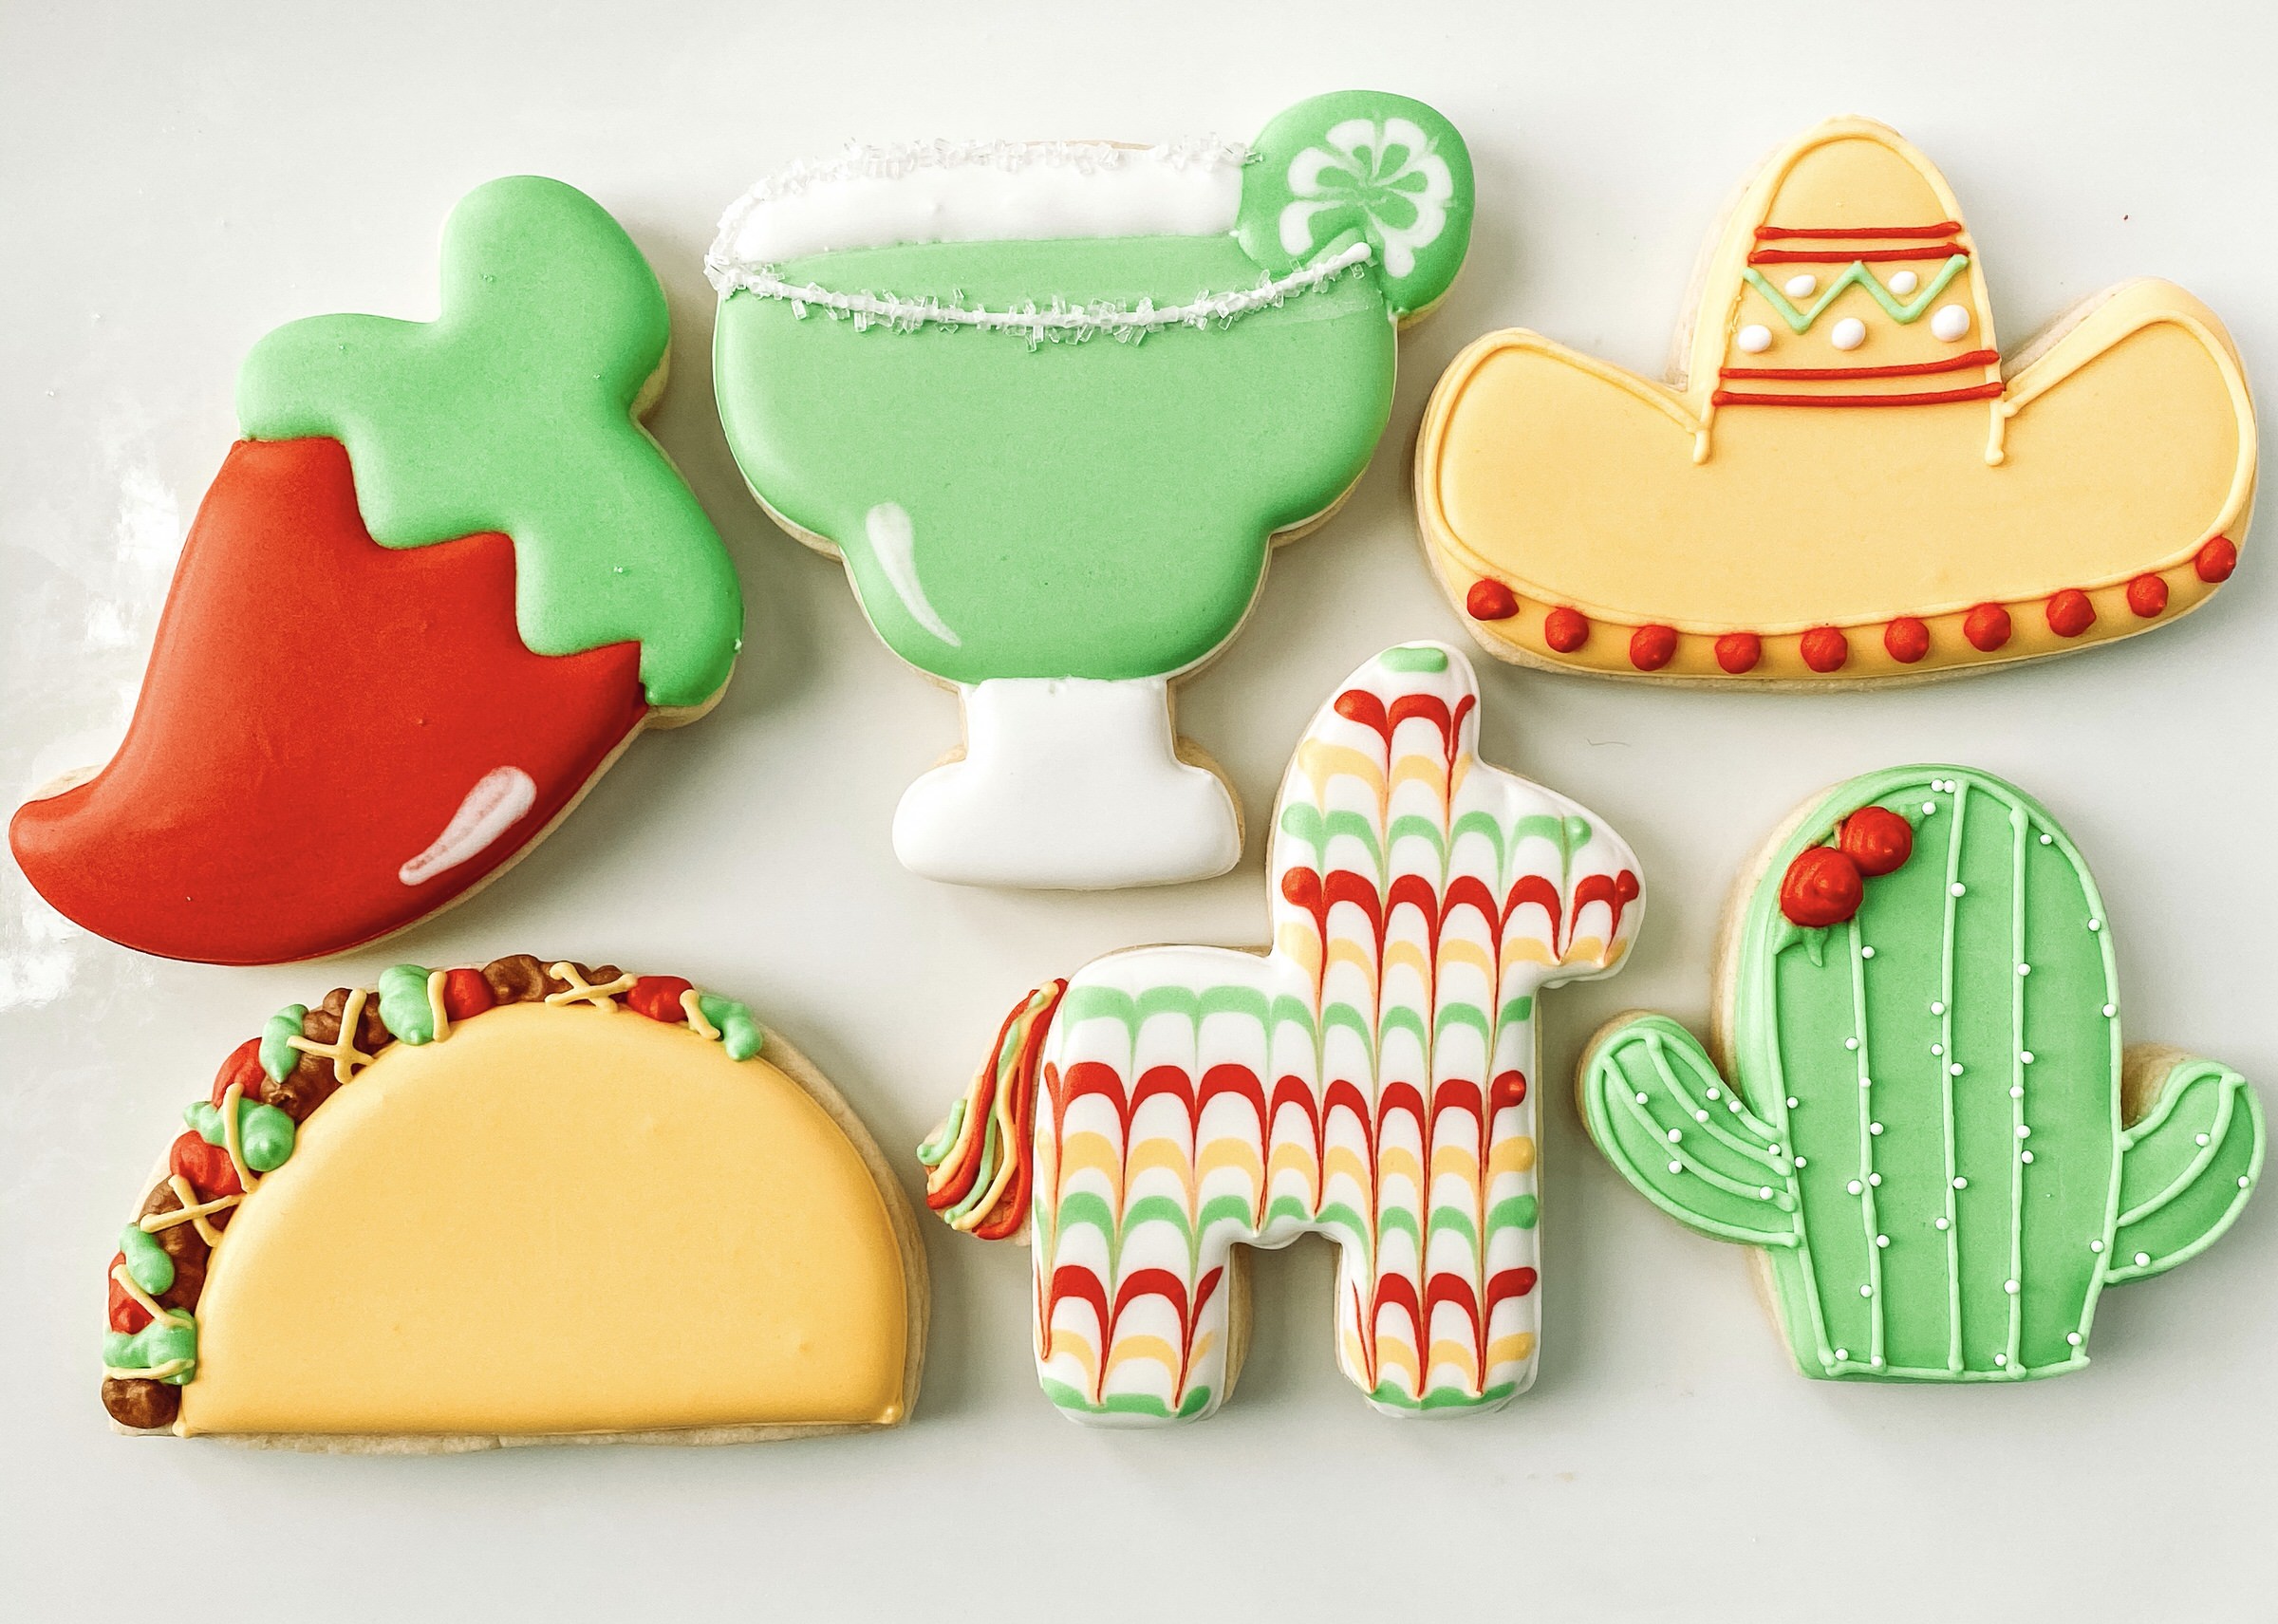 A Checklist for Cookie Decorating Supplies